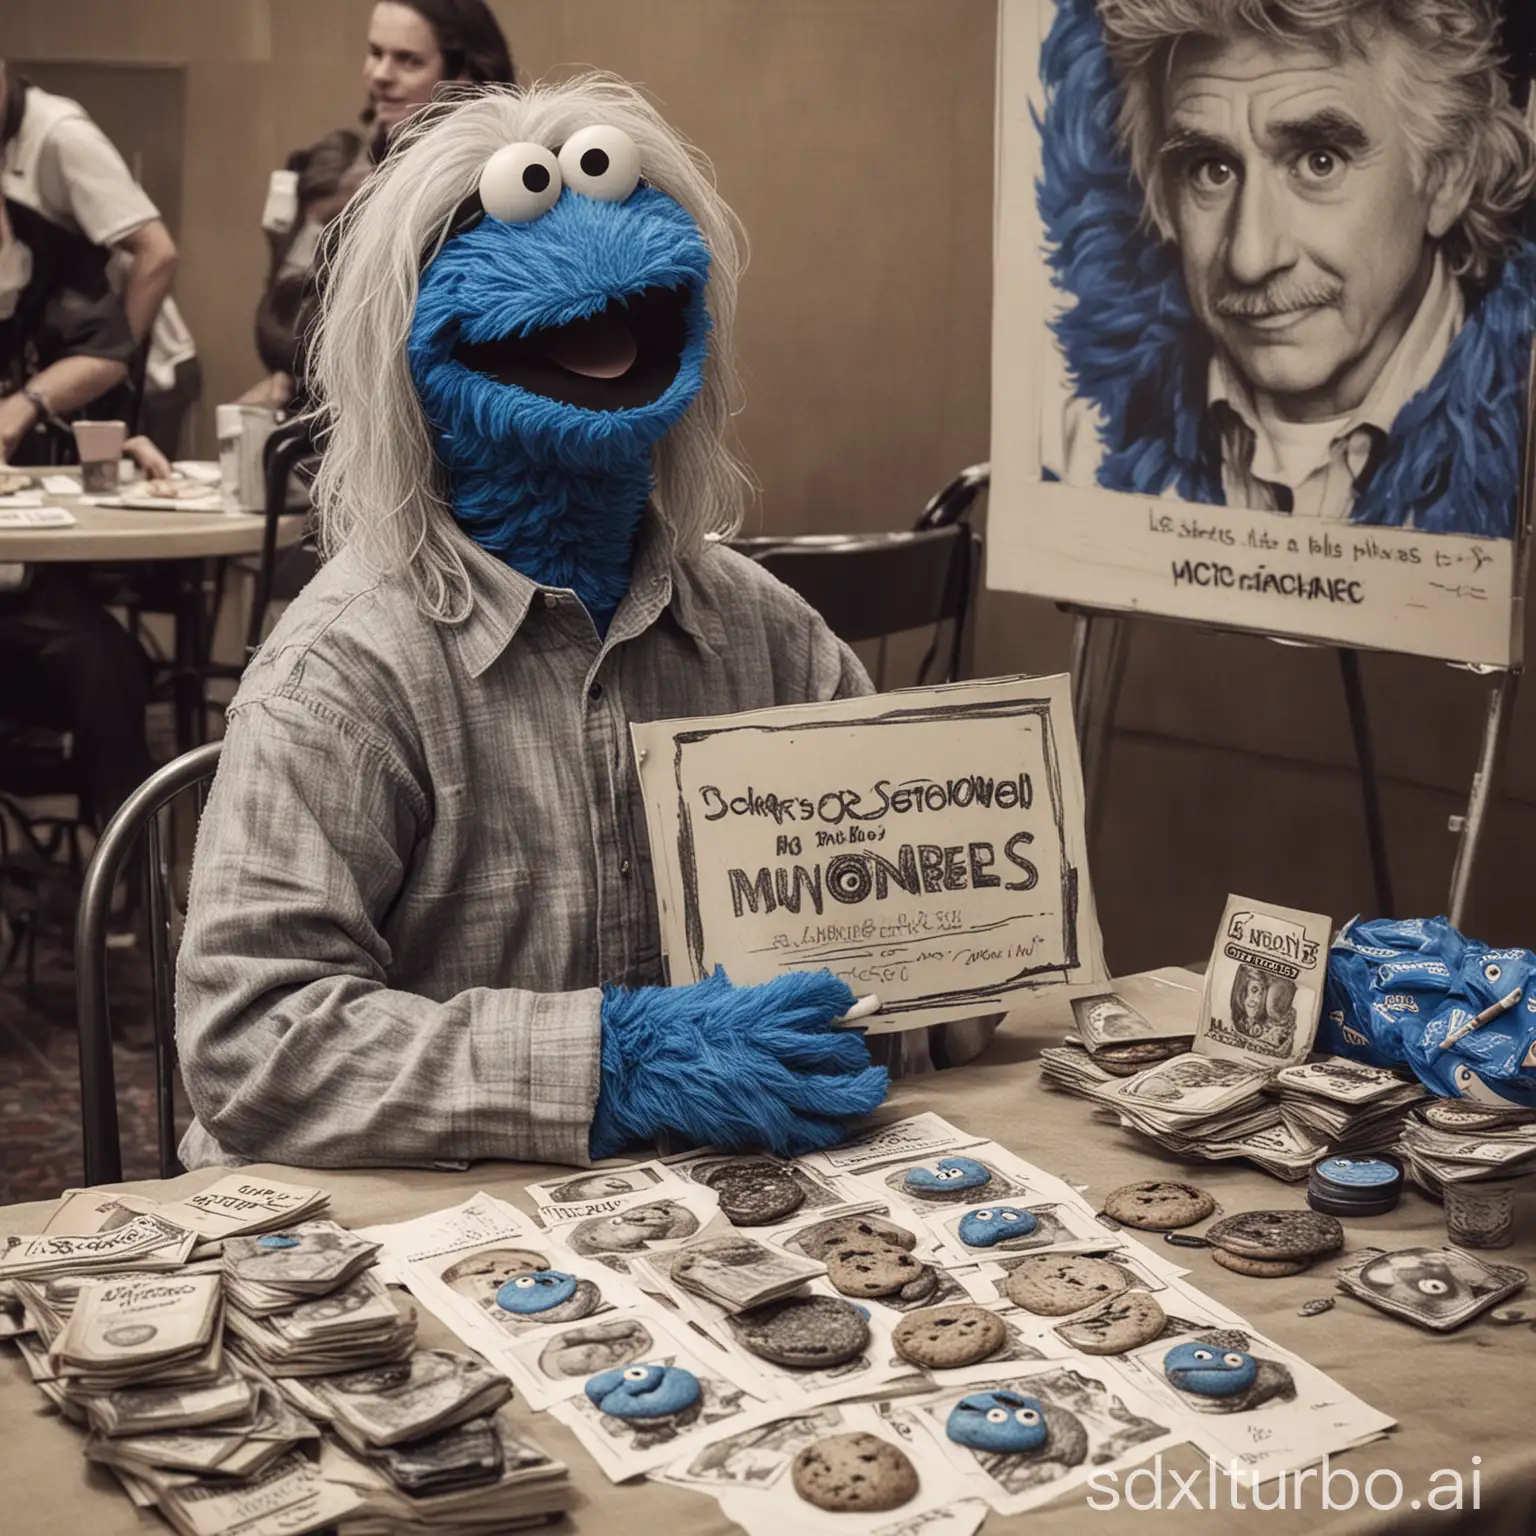 Hyperrealistic photo of older, gray hair, heavier Cookie Monster. He is at a table selling autographed photos of his younger self at a poorly attended fan convention. There are sharpies, money and a sign for autographs on the table. Bg is Sesame Street themed and its characters.